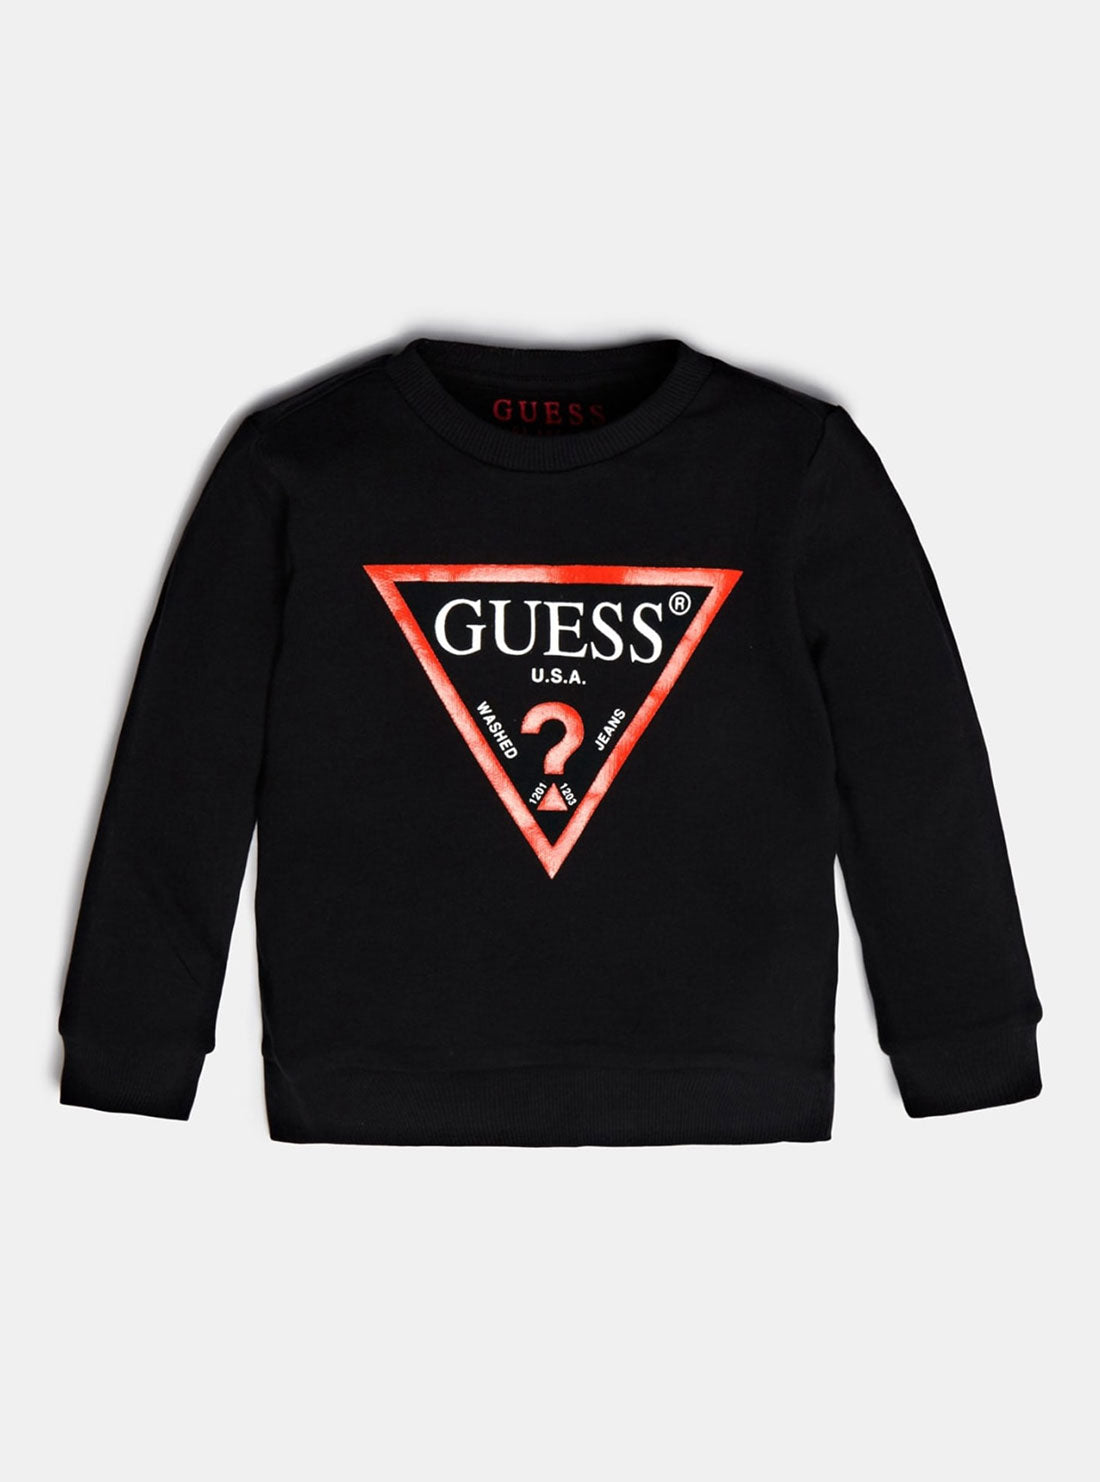 GUESS Big Boys Black Long Sleeve Fleece Pullover Top (7-16) N73Q10K5WK0 Front View